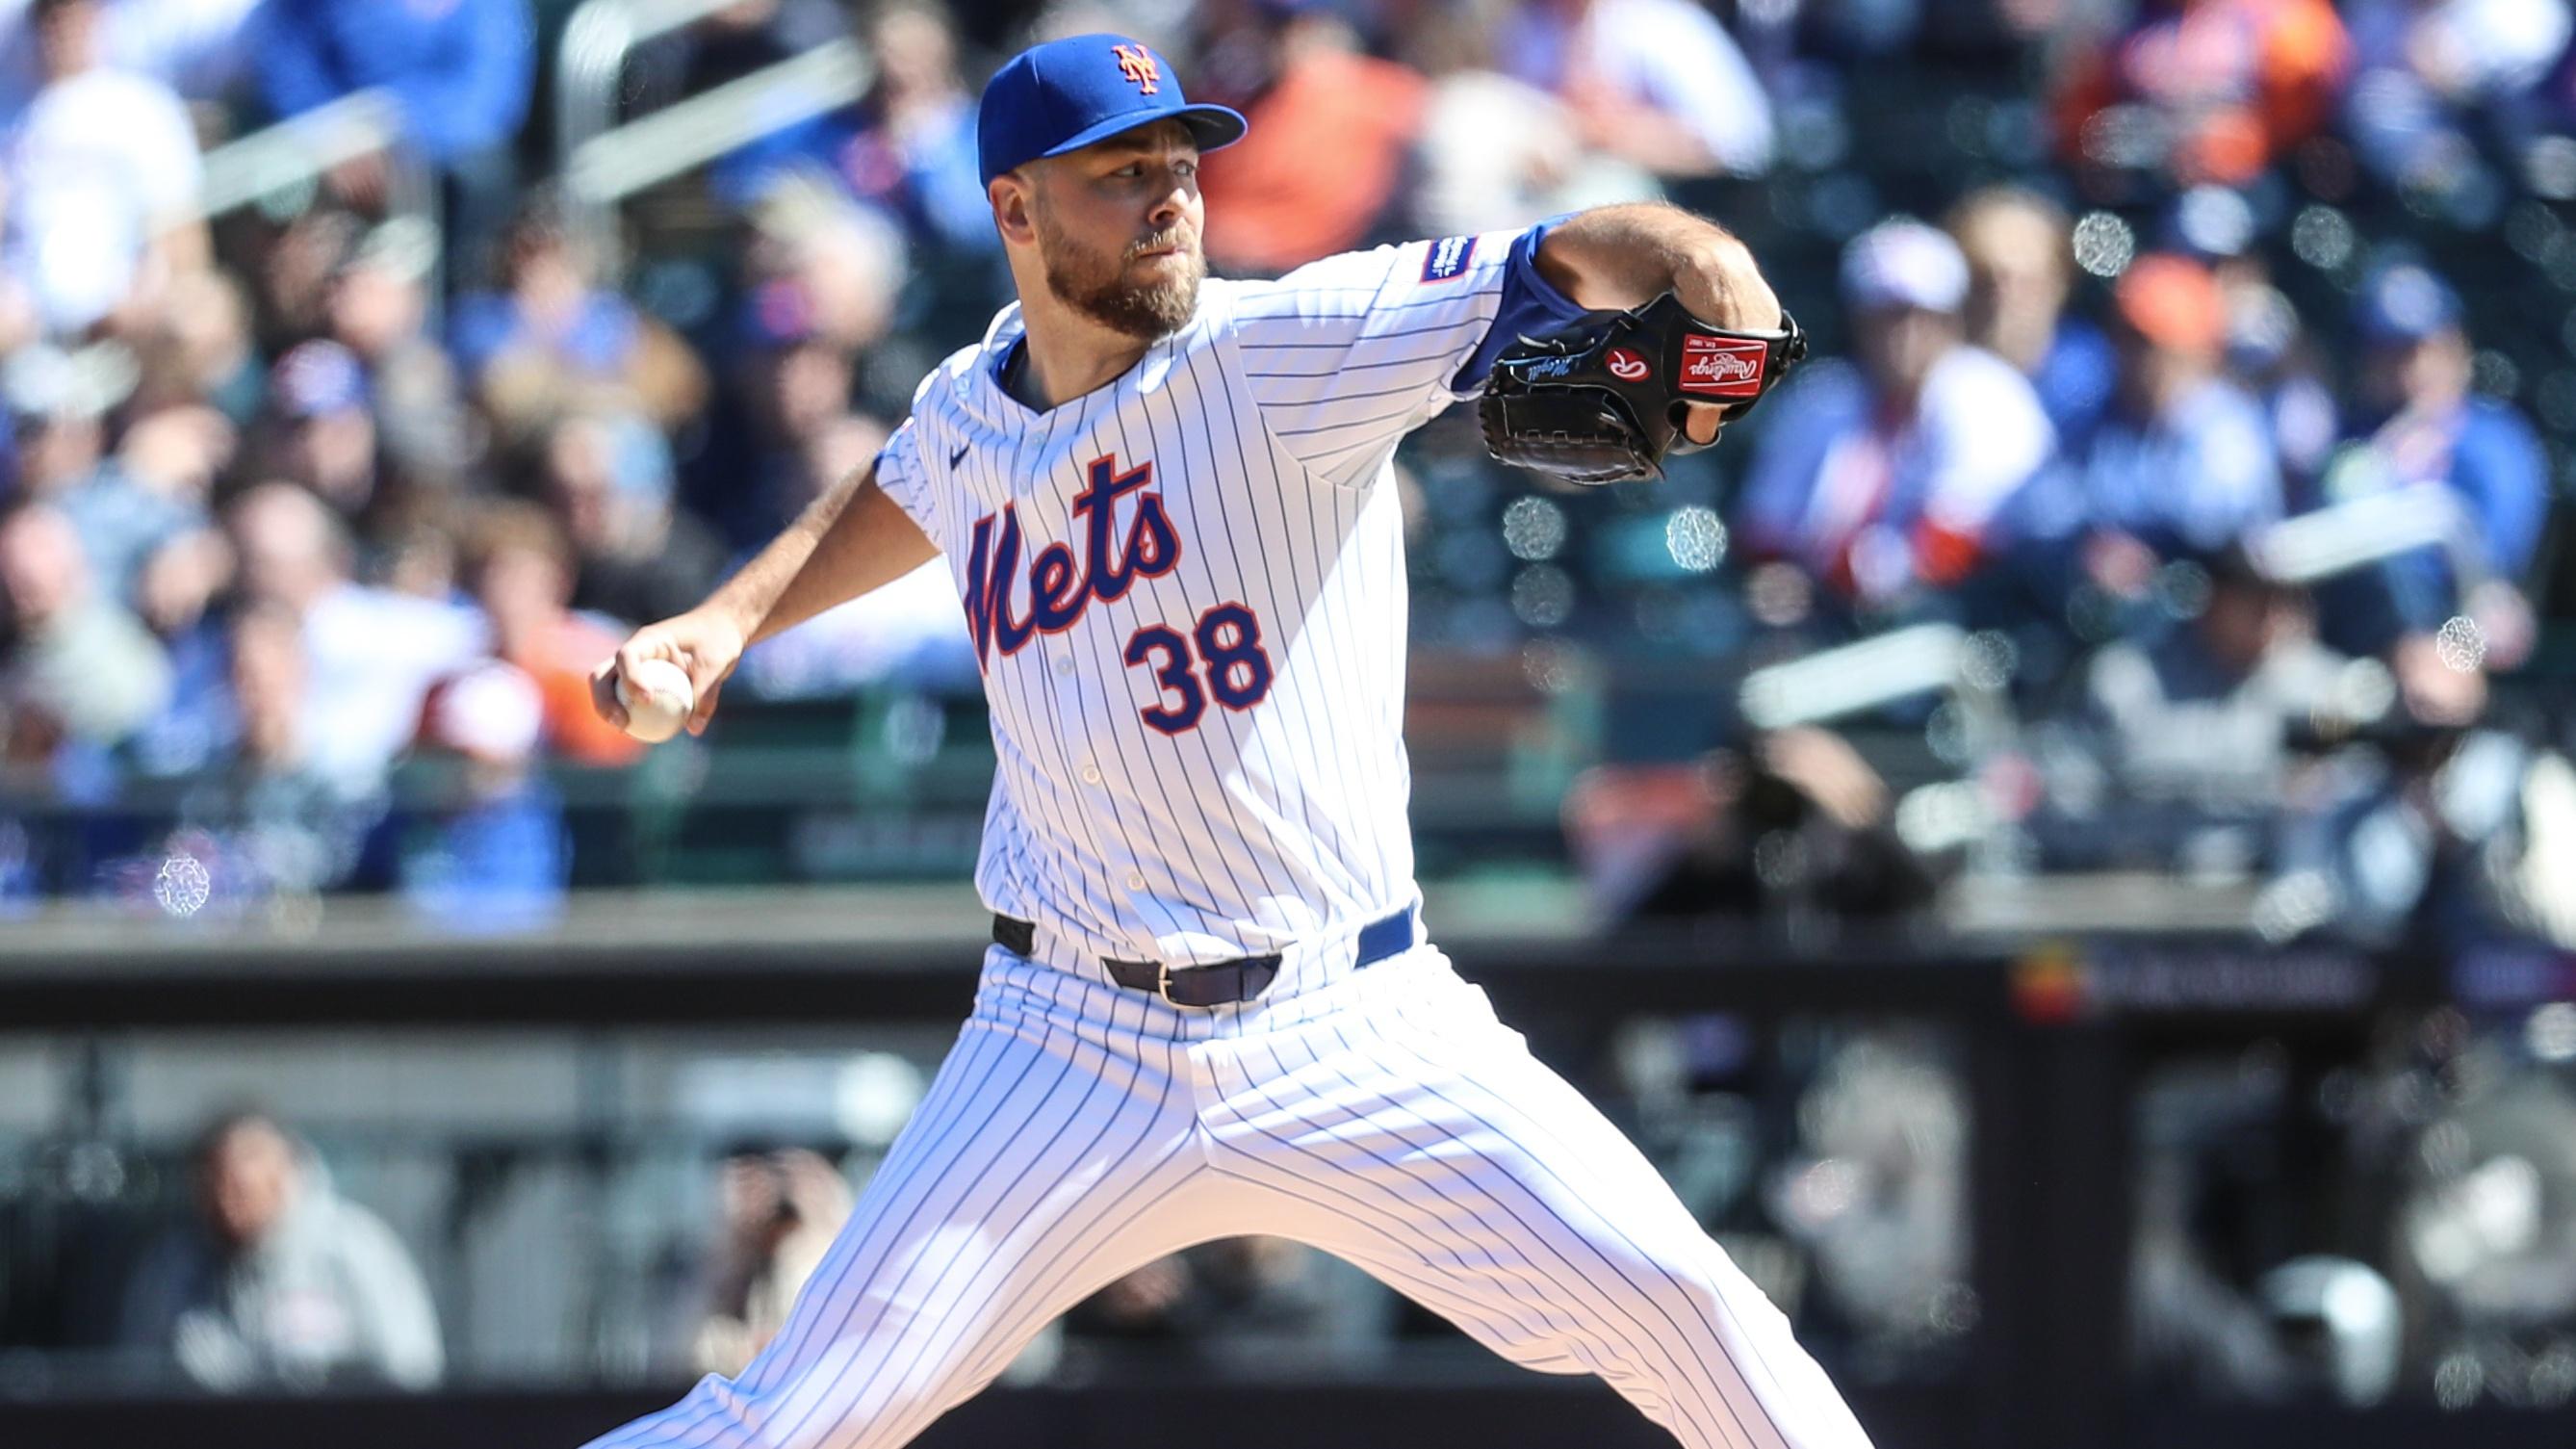 New York Mets starting pitcher Tylor Megill (38) pitches in the first inning against the Milwaukee Brewers at Citi Field / Wendell Cruz - USA TODAY Sports